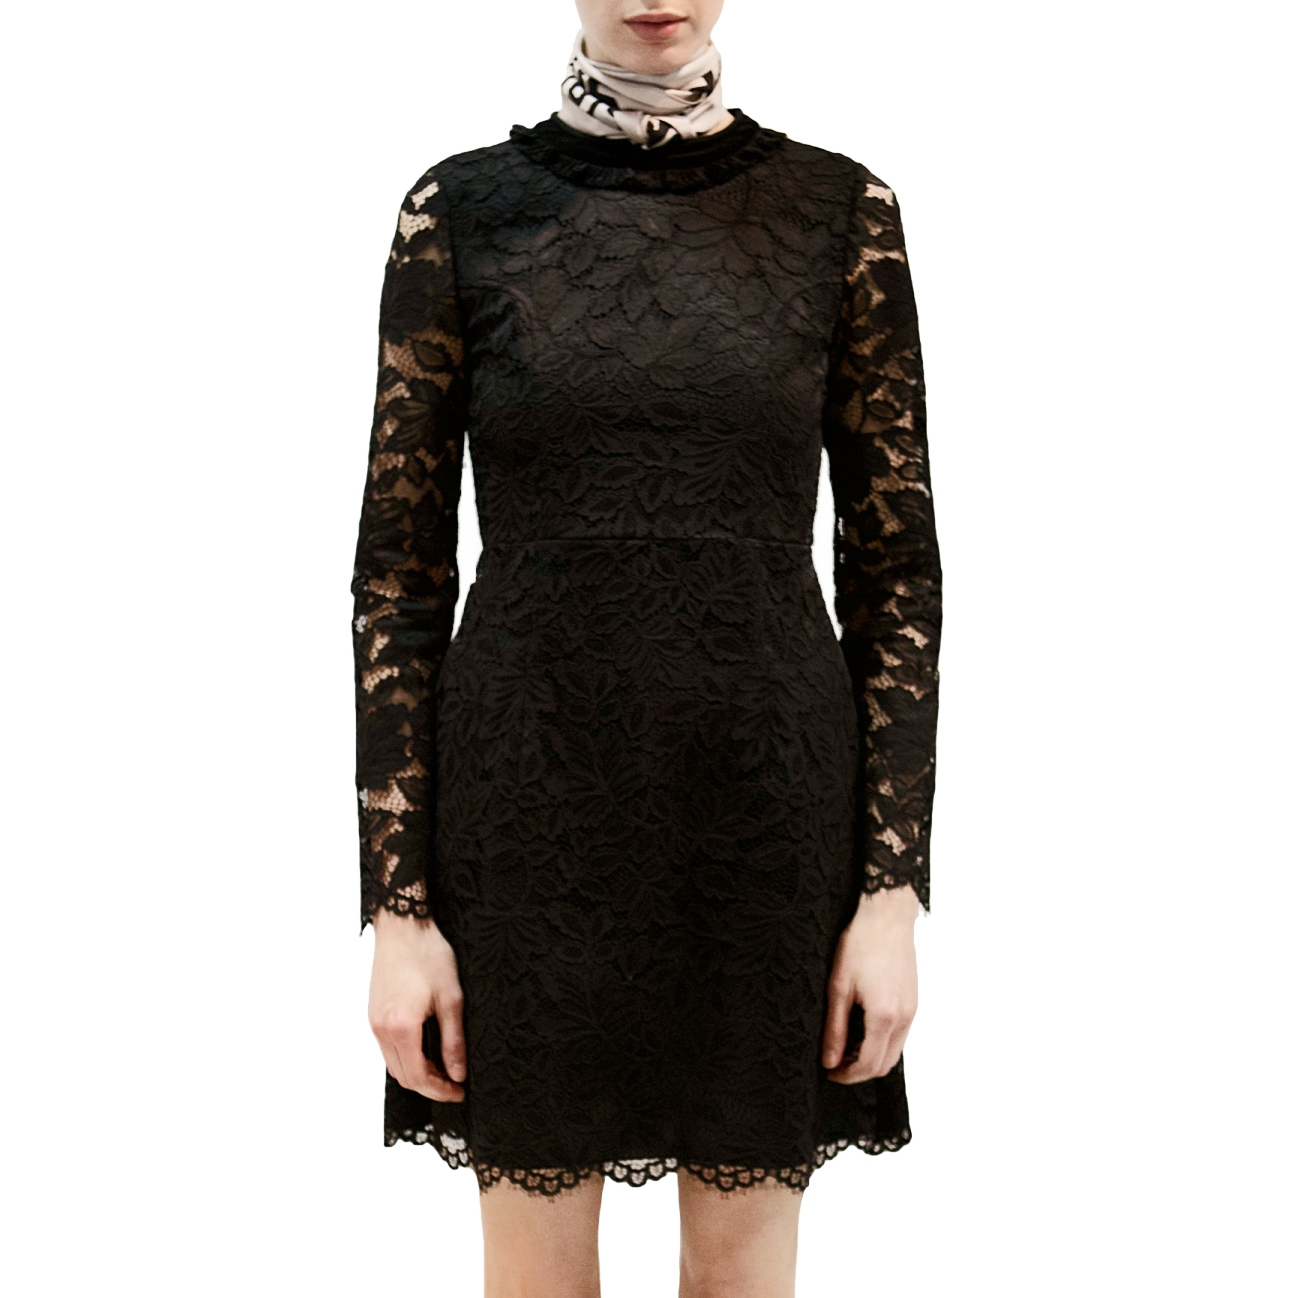 Marc by Marc Jacobs Long-Sleeve Lace Dress